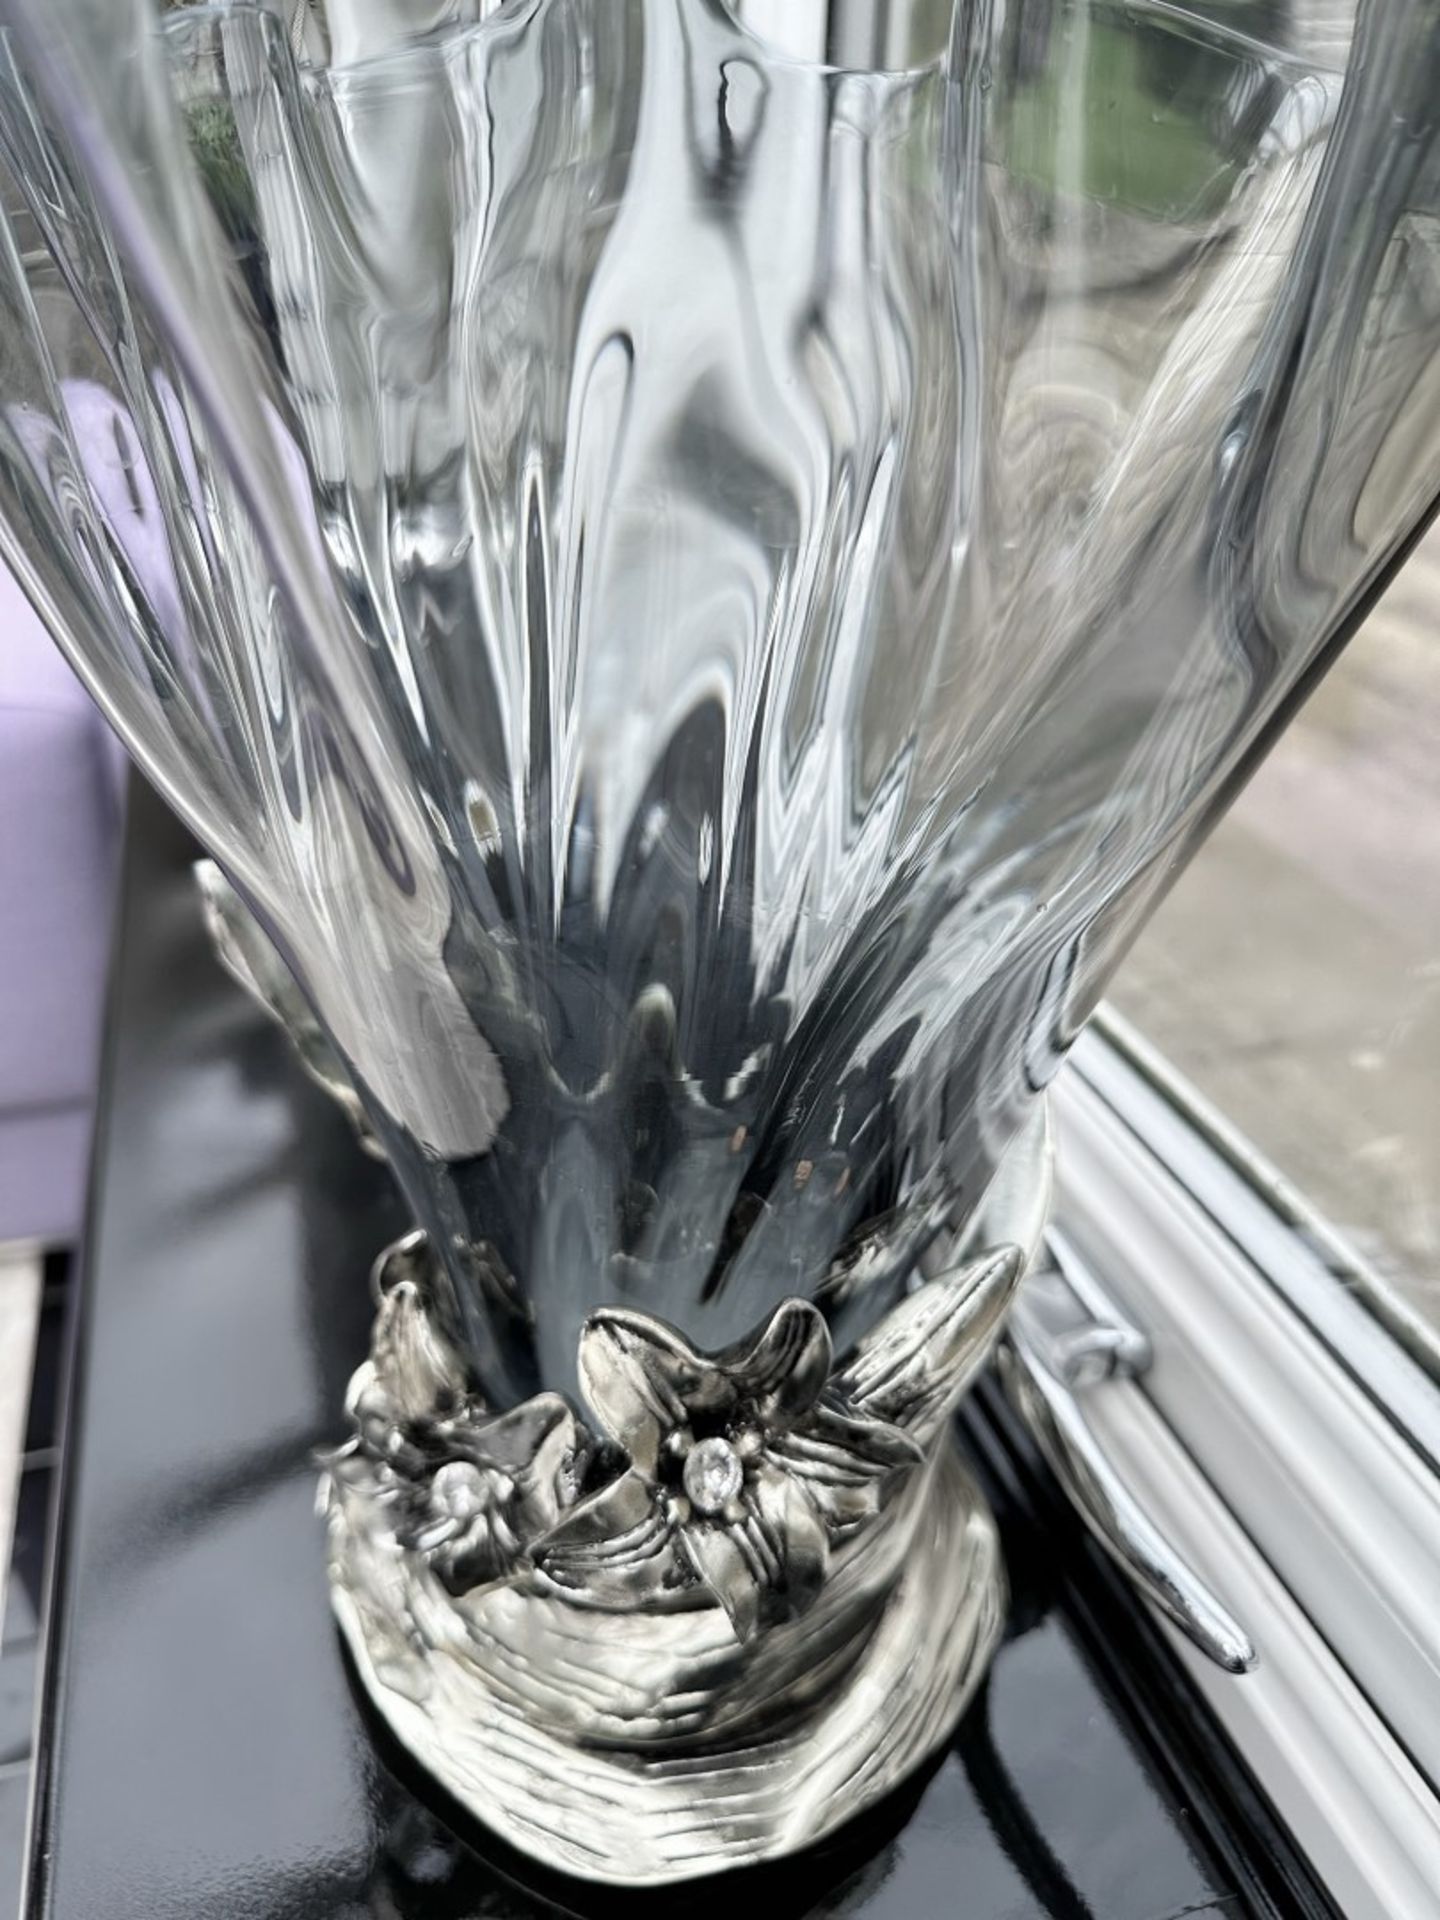 1 x Crystal Glass Vase With Floral Design Metal Base And Diamante Detailing - Image 2 of 3